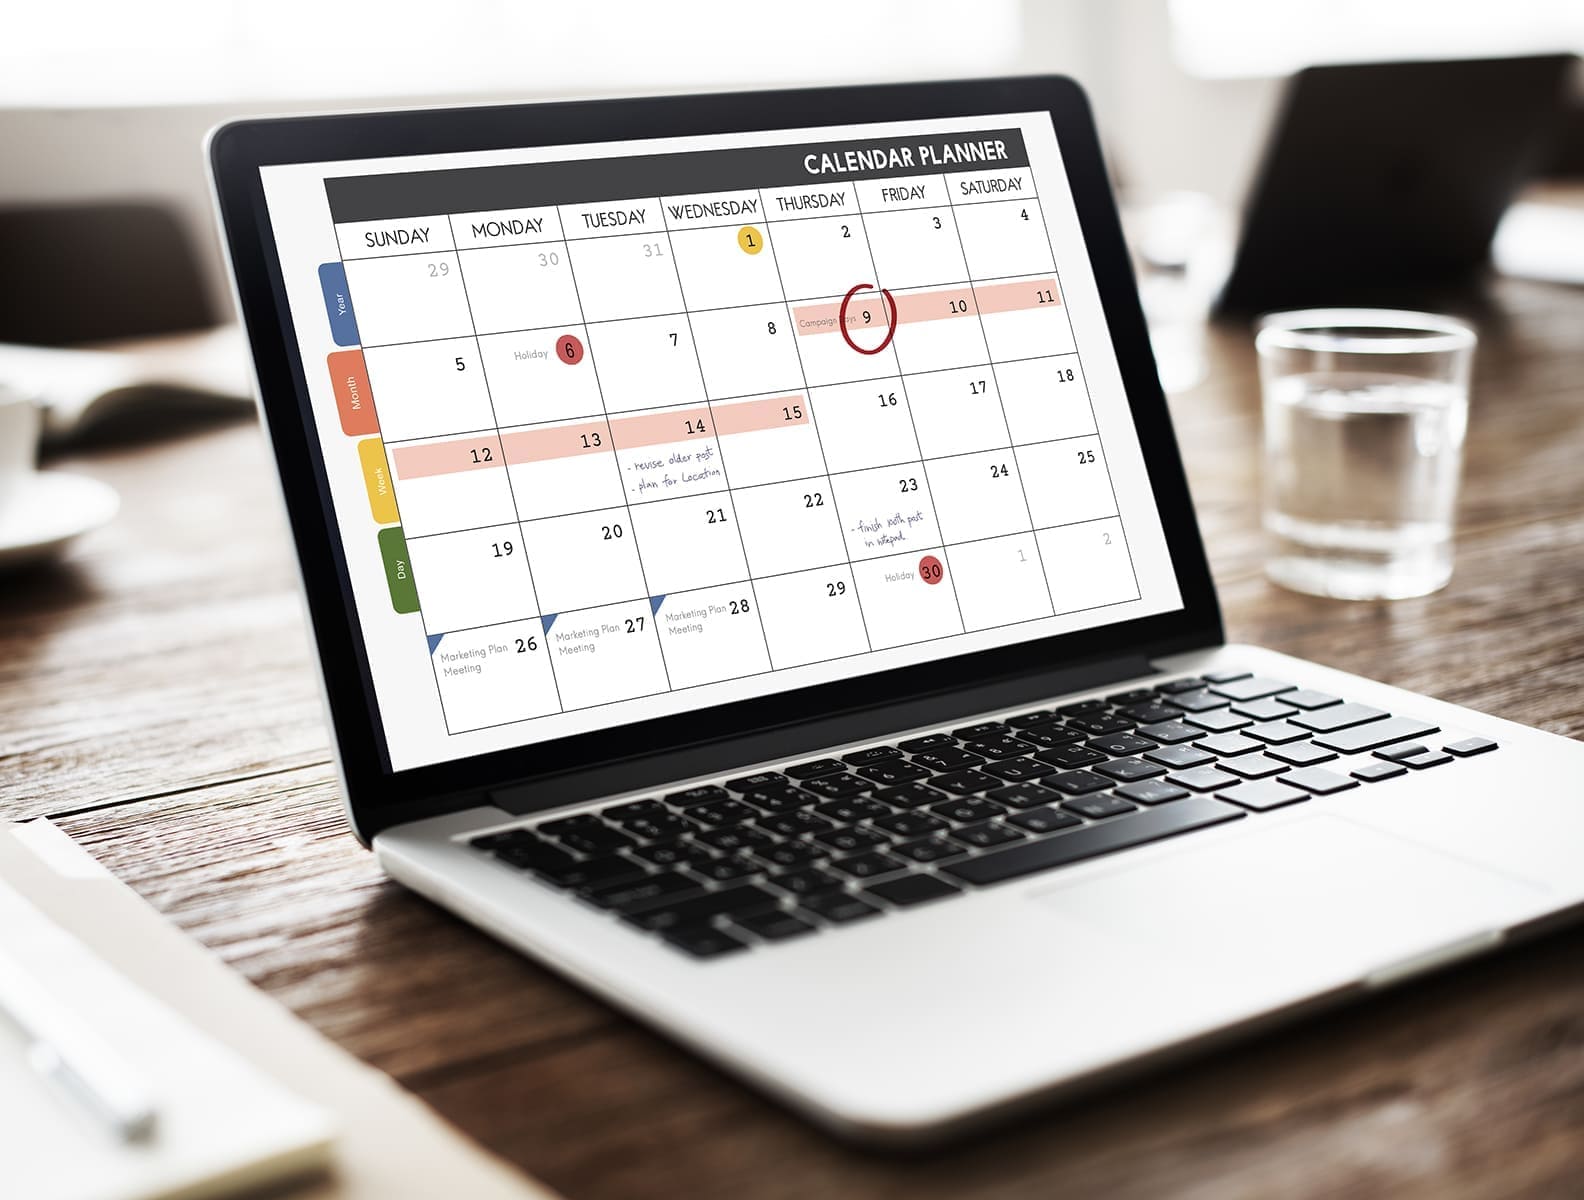 How to be successful with your social media content calendar?